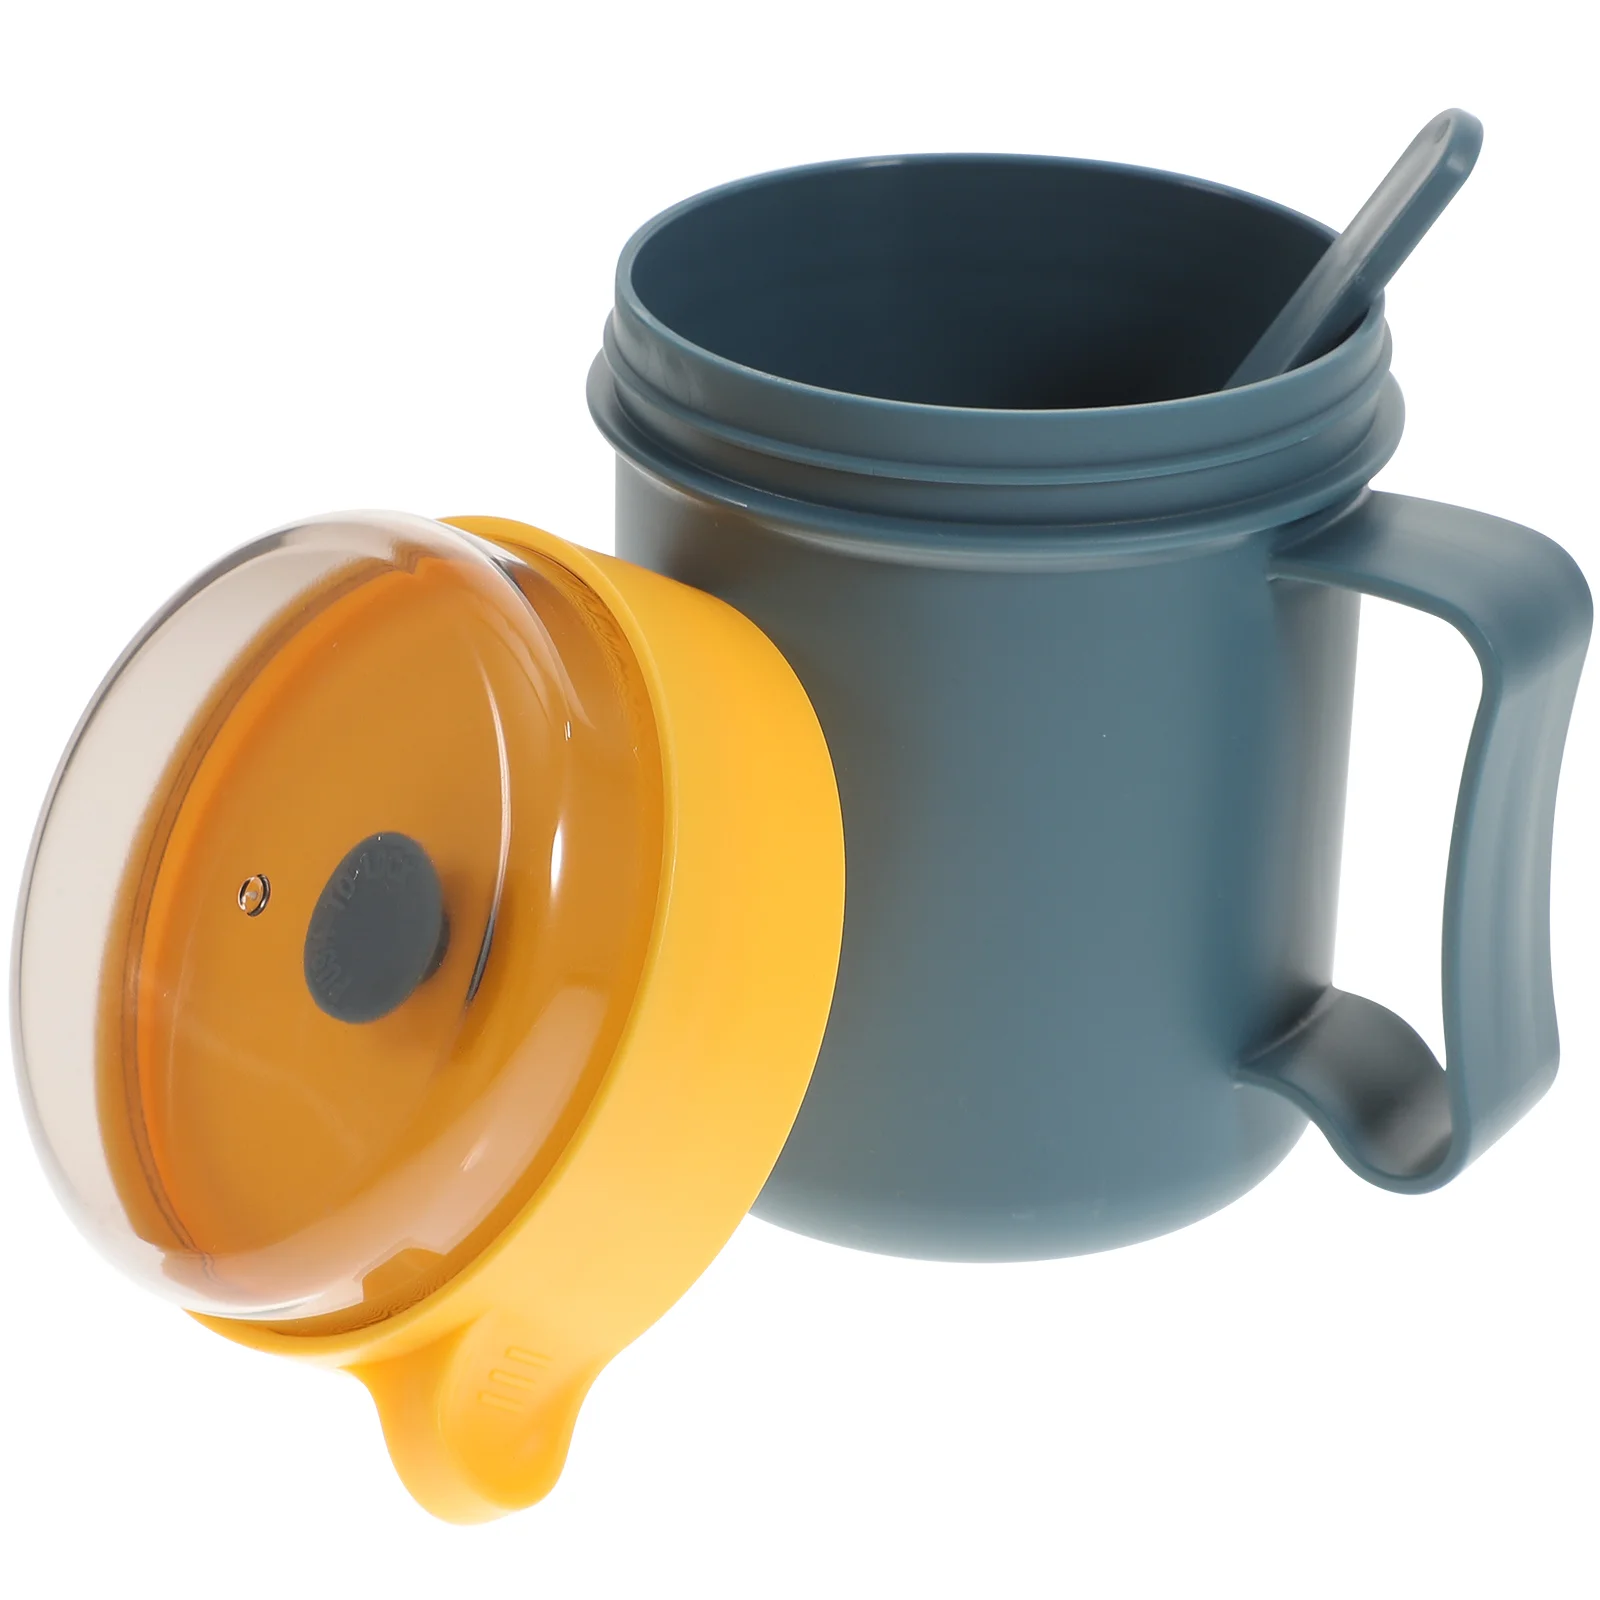 Cup Soup Portable Breakfast Cereal Container Microwave Jar Mug Hot Lids Lunch Thermal Containers Go Bowl Box Flask Lid The